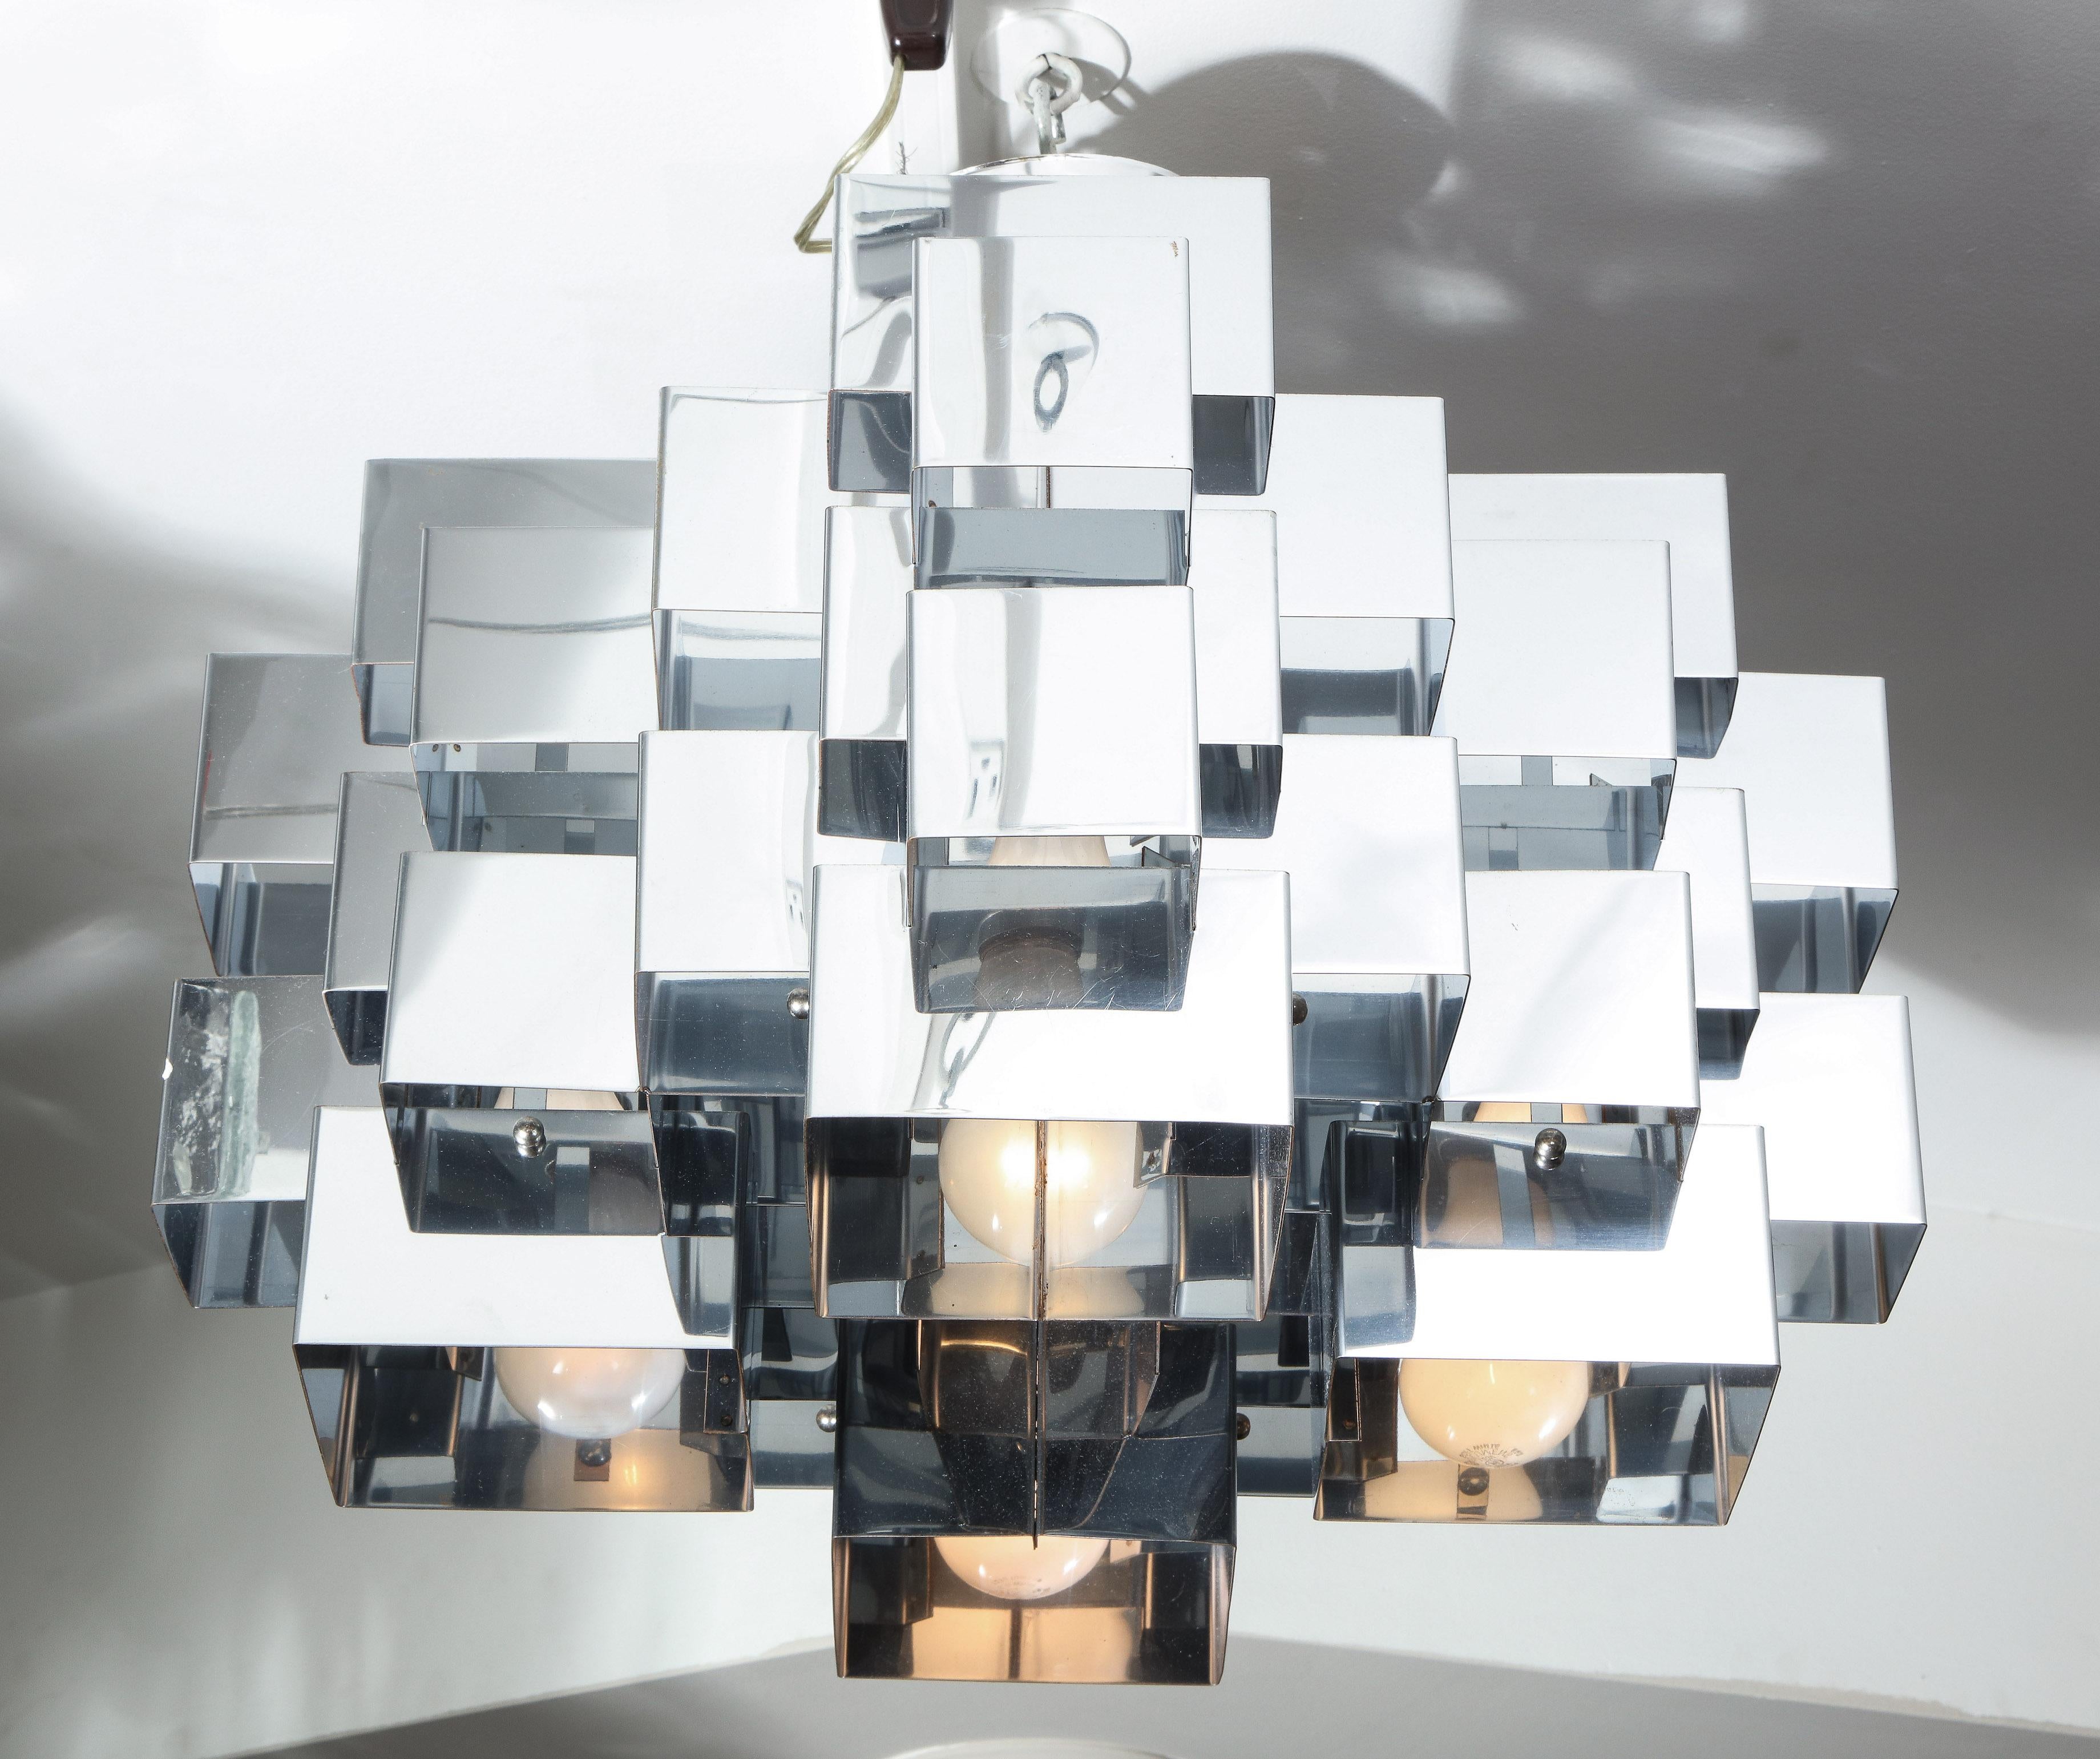 Vintage Cubist chrome chandelier by Curtis Jere. Minor rusting showing on few edges of the metal square shades. Takes 4 lightbulbs.